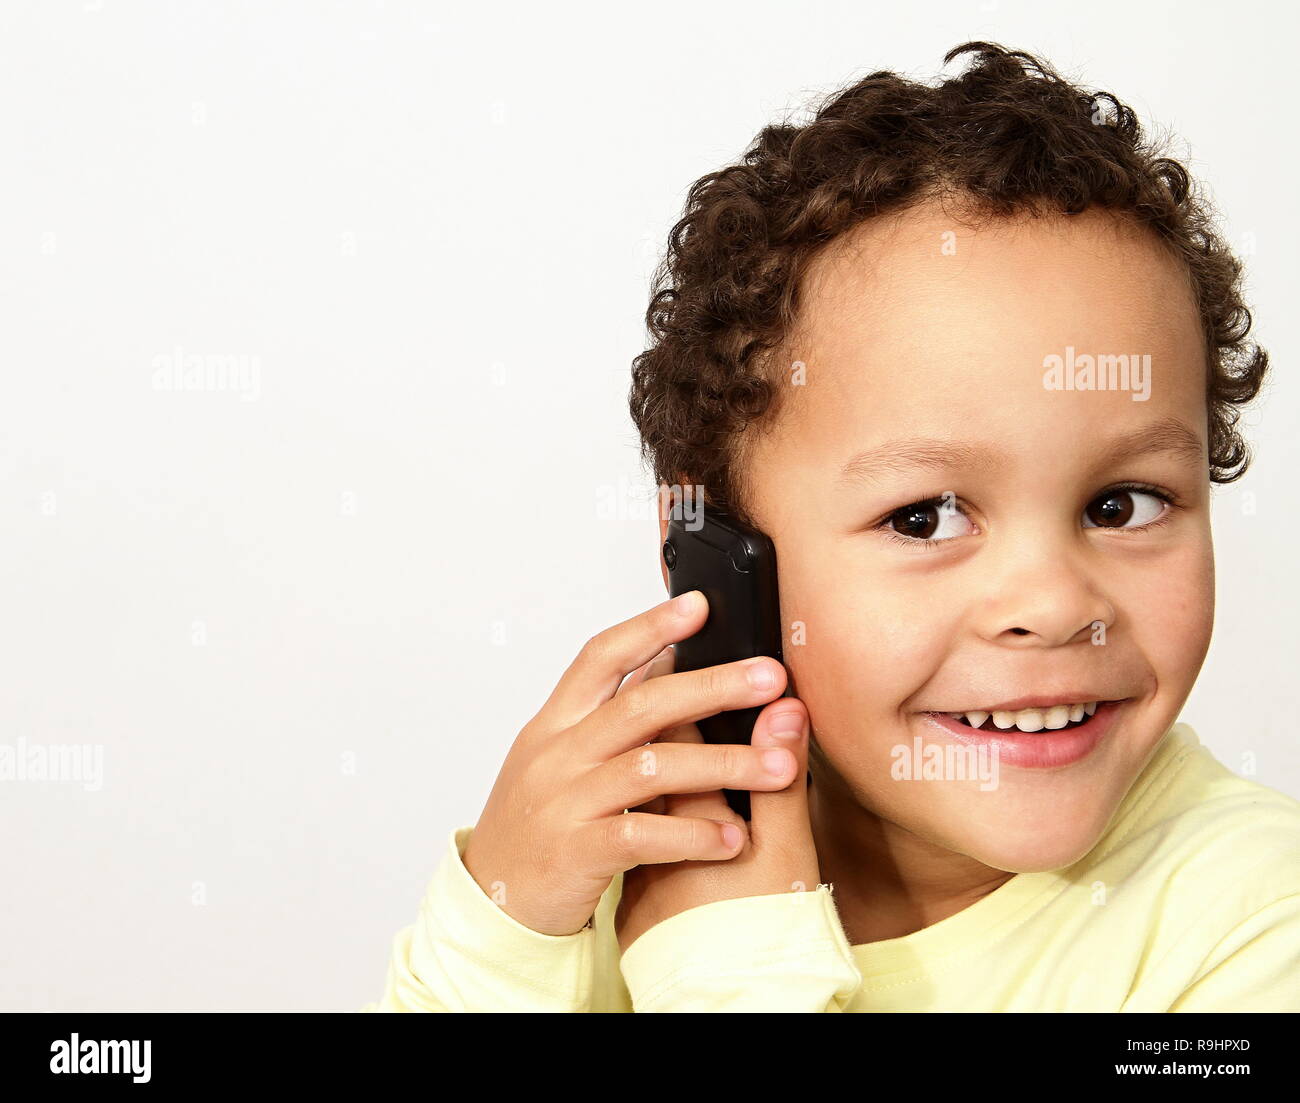 little boy with mobile making a phone call stock photo Stock Photo